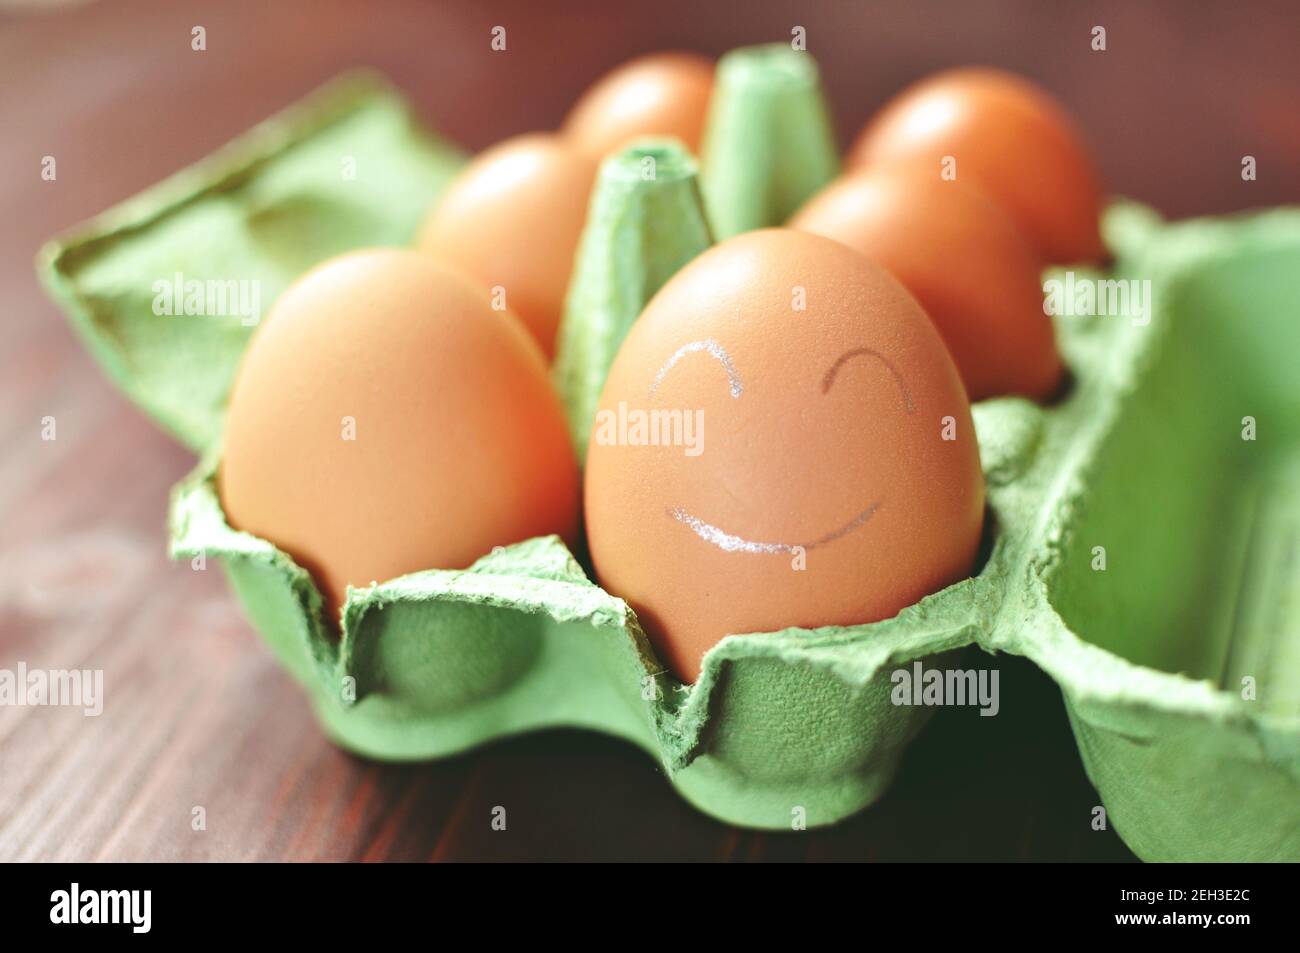 Group of brown chicken eggs in an green open form work on brown background. The closest egg is painted with white smiley face. Front view. Stock Photo